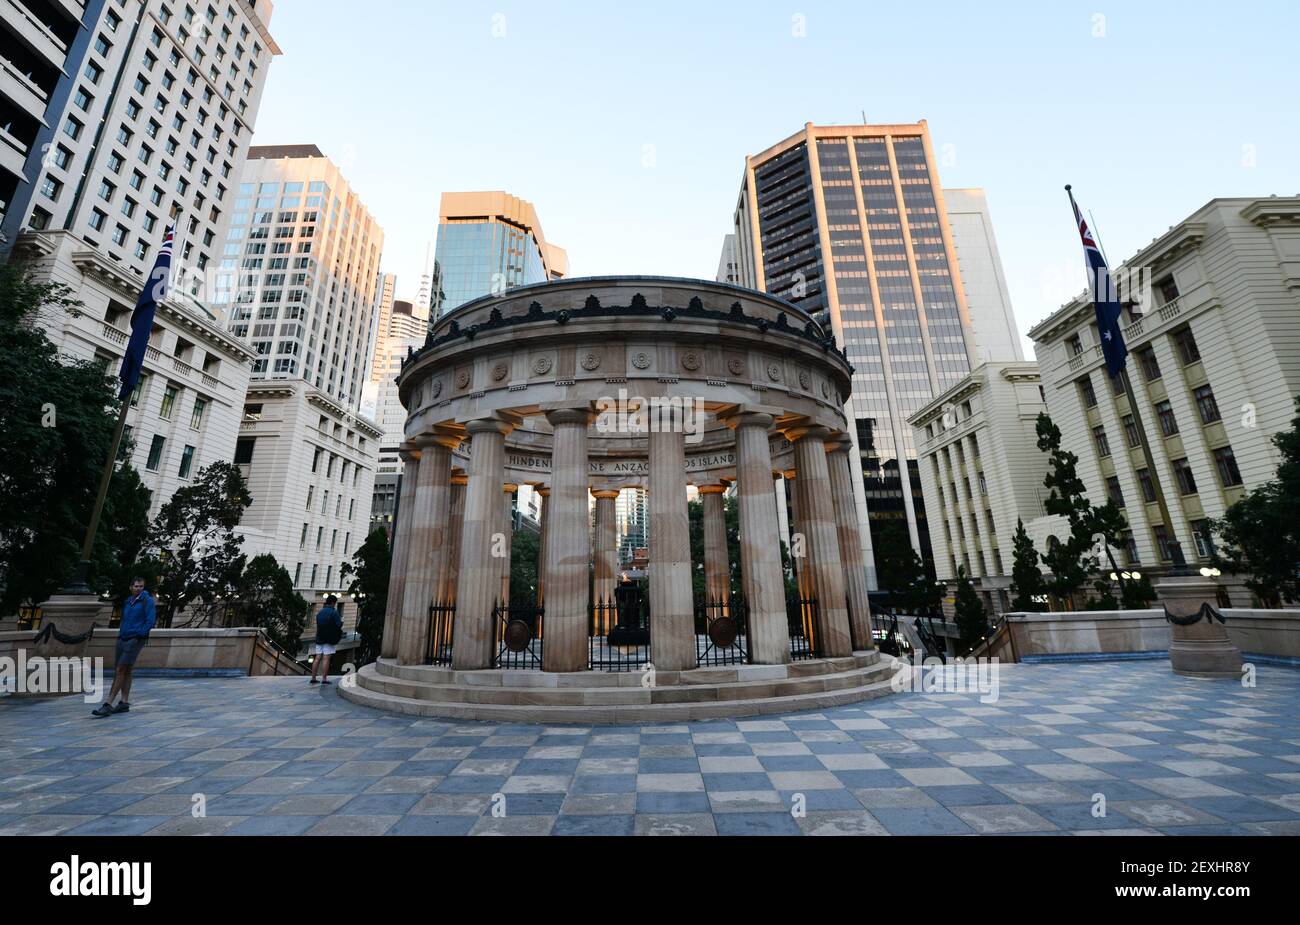 The Shrine of Remembrance is located in ANZAC Square, between Ann Street and Adelaide Street, in Brisbane, Queensland, Australia. Stock Photo